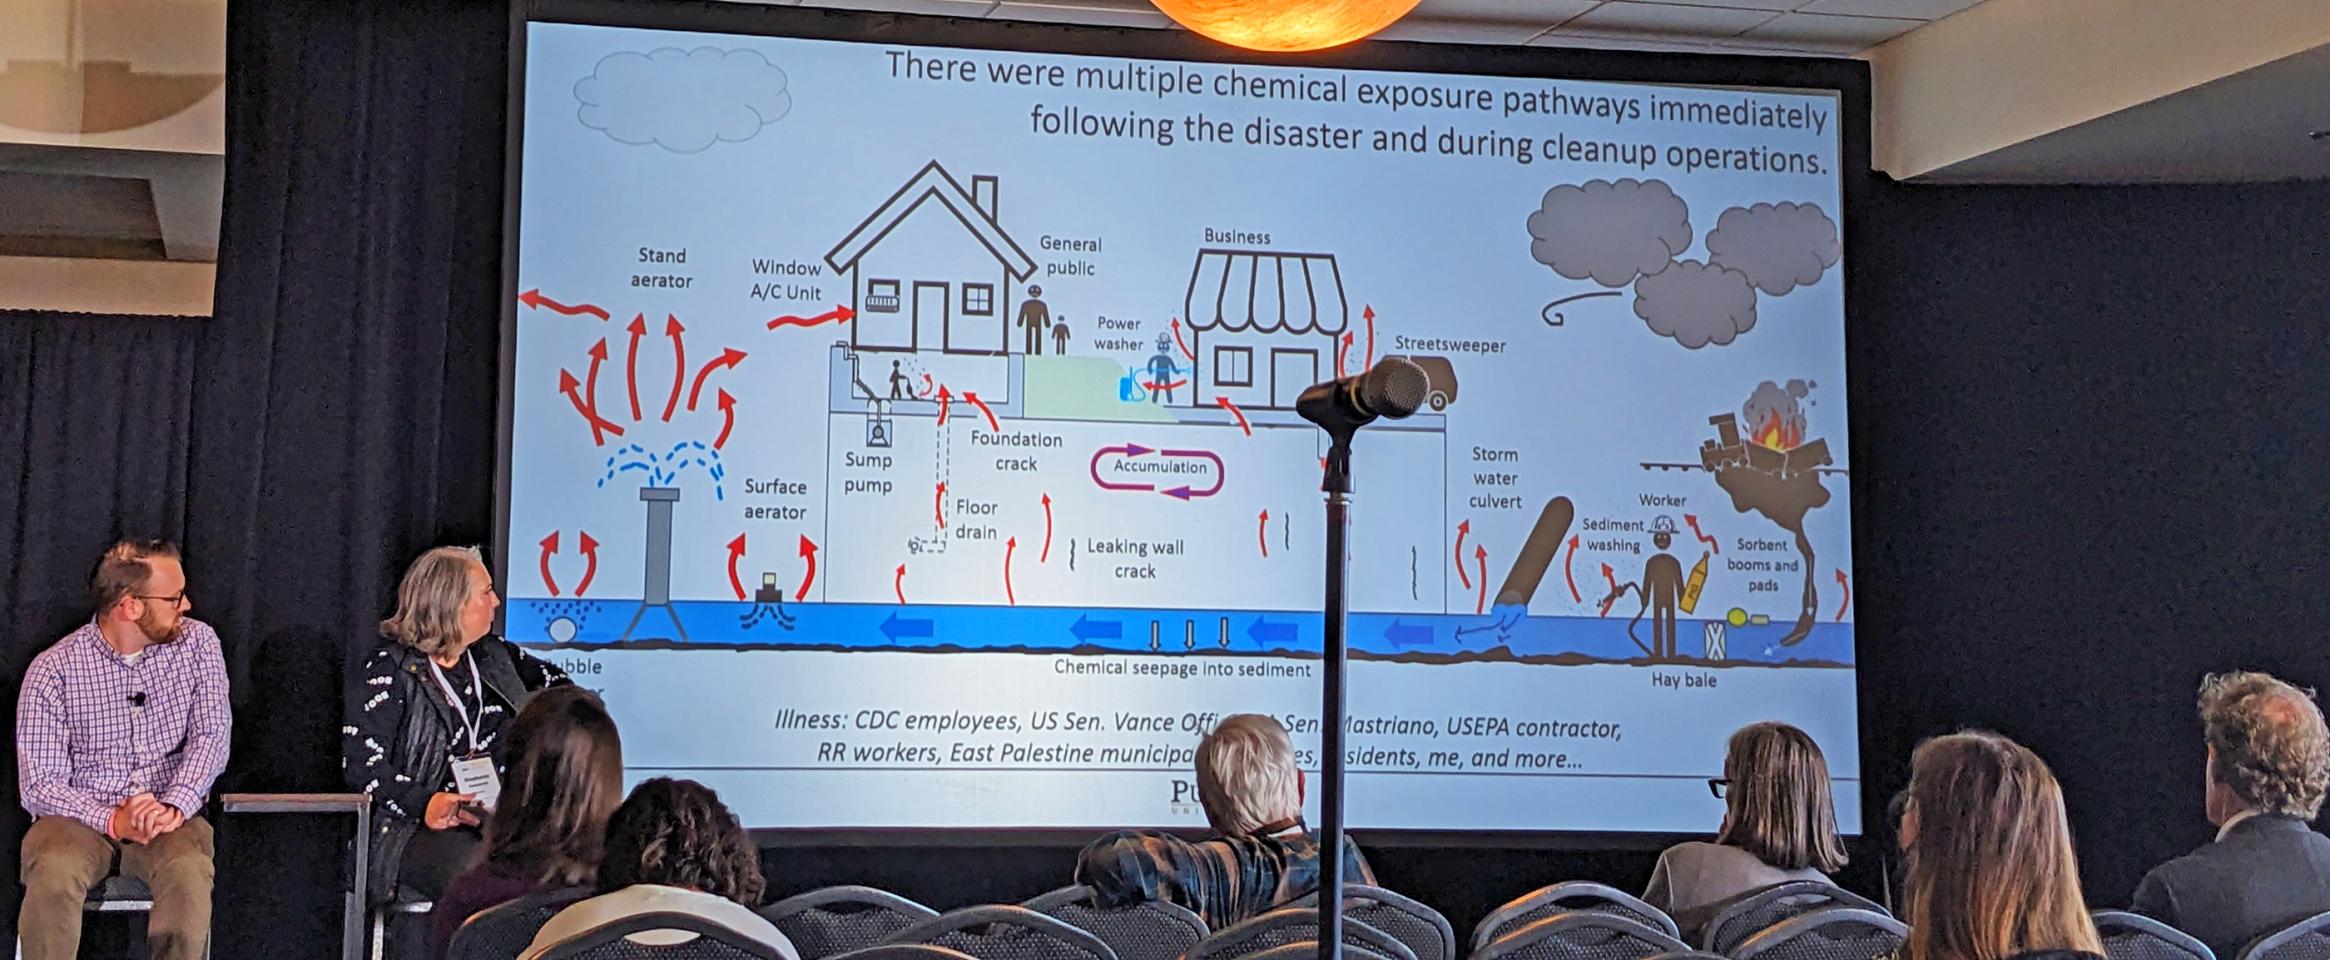 Photo shows conference attendees and panelists Nick Messenger and Stephanie Czekalinski looking at a slide with an illustrated figure showing the multiple chemical exposure pathways that occurred immediately following the disaster and during cleanup operations. Photo by Helina Selemon